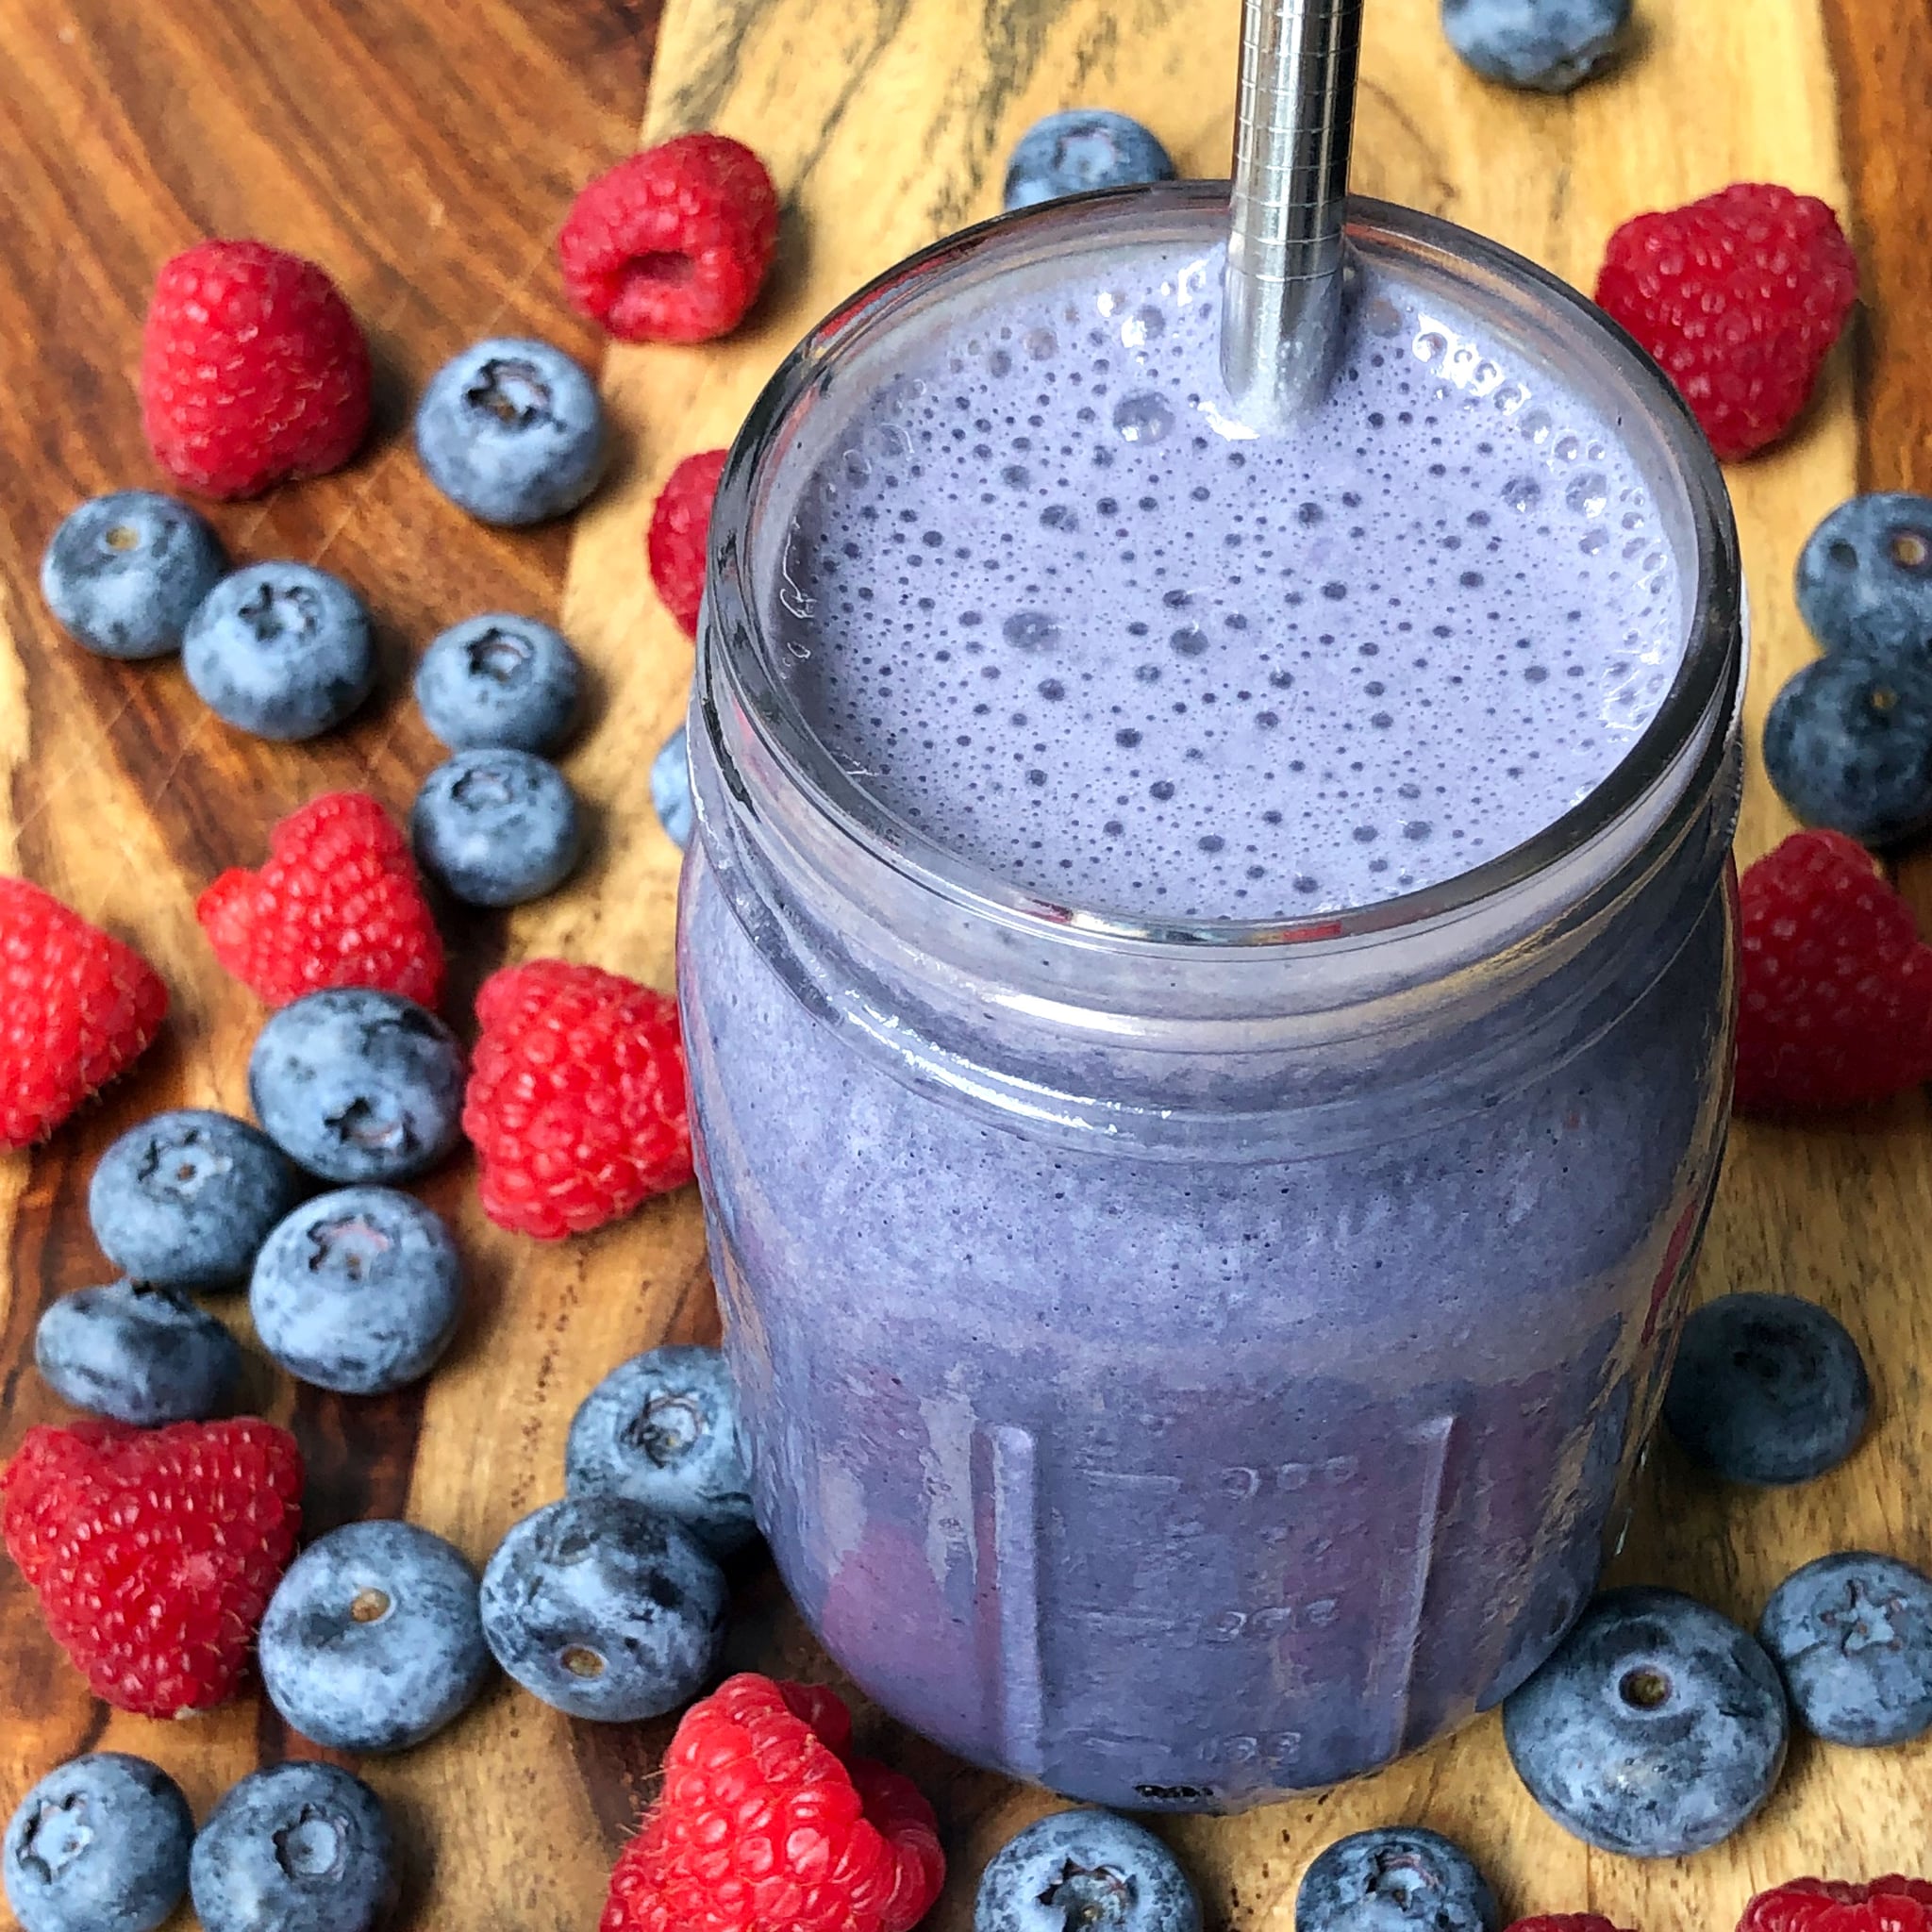 Are Homemade Smoothies Good For Weight Loss? 